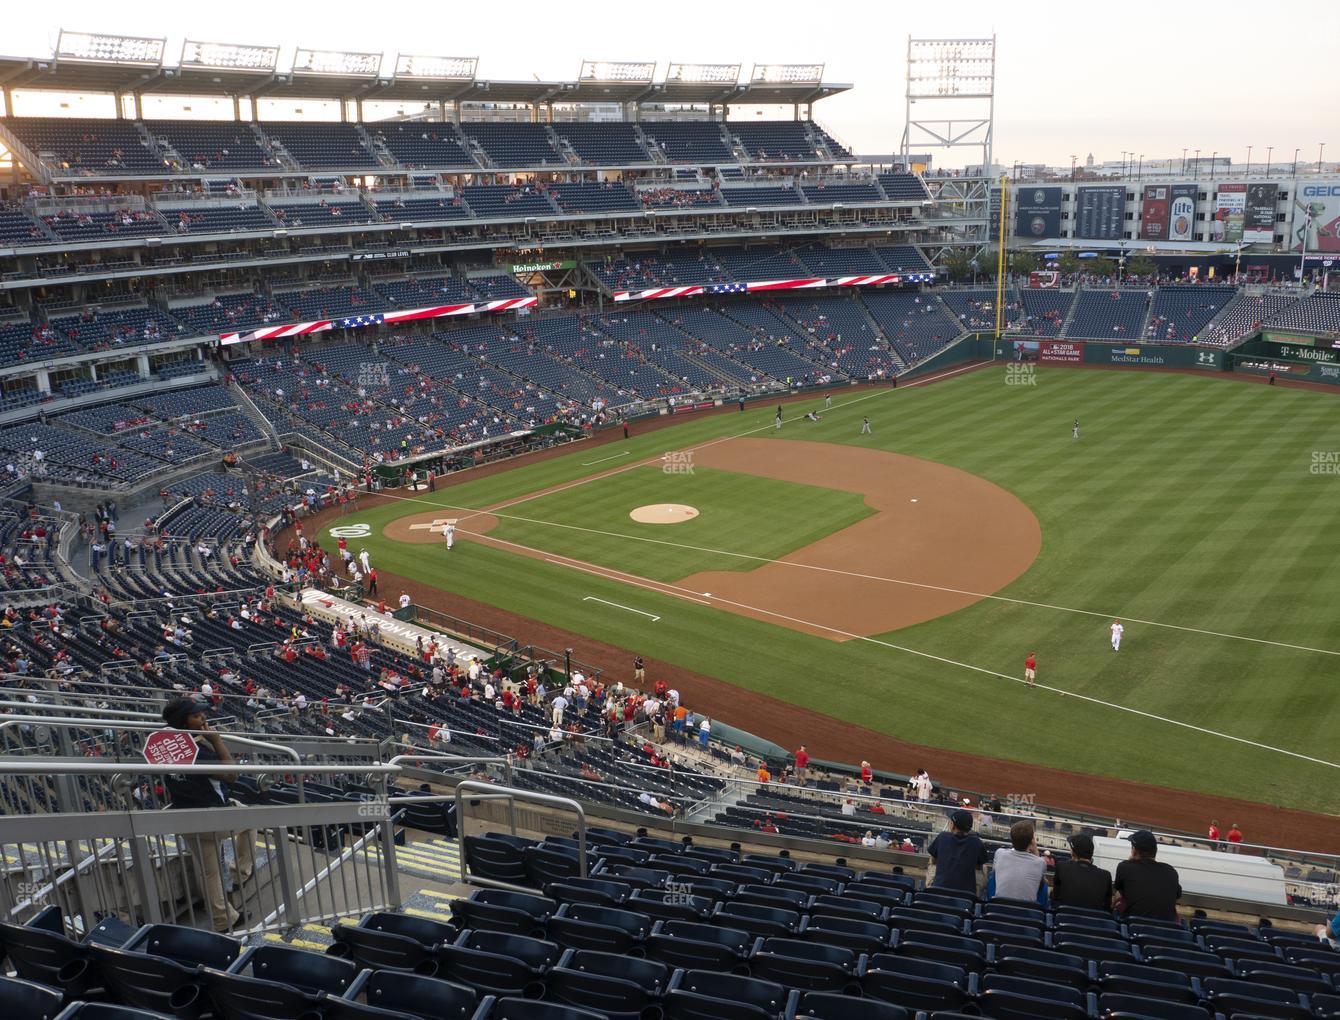 Nats Park Seating Chart With Rows